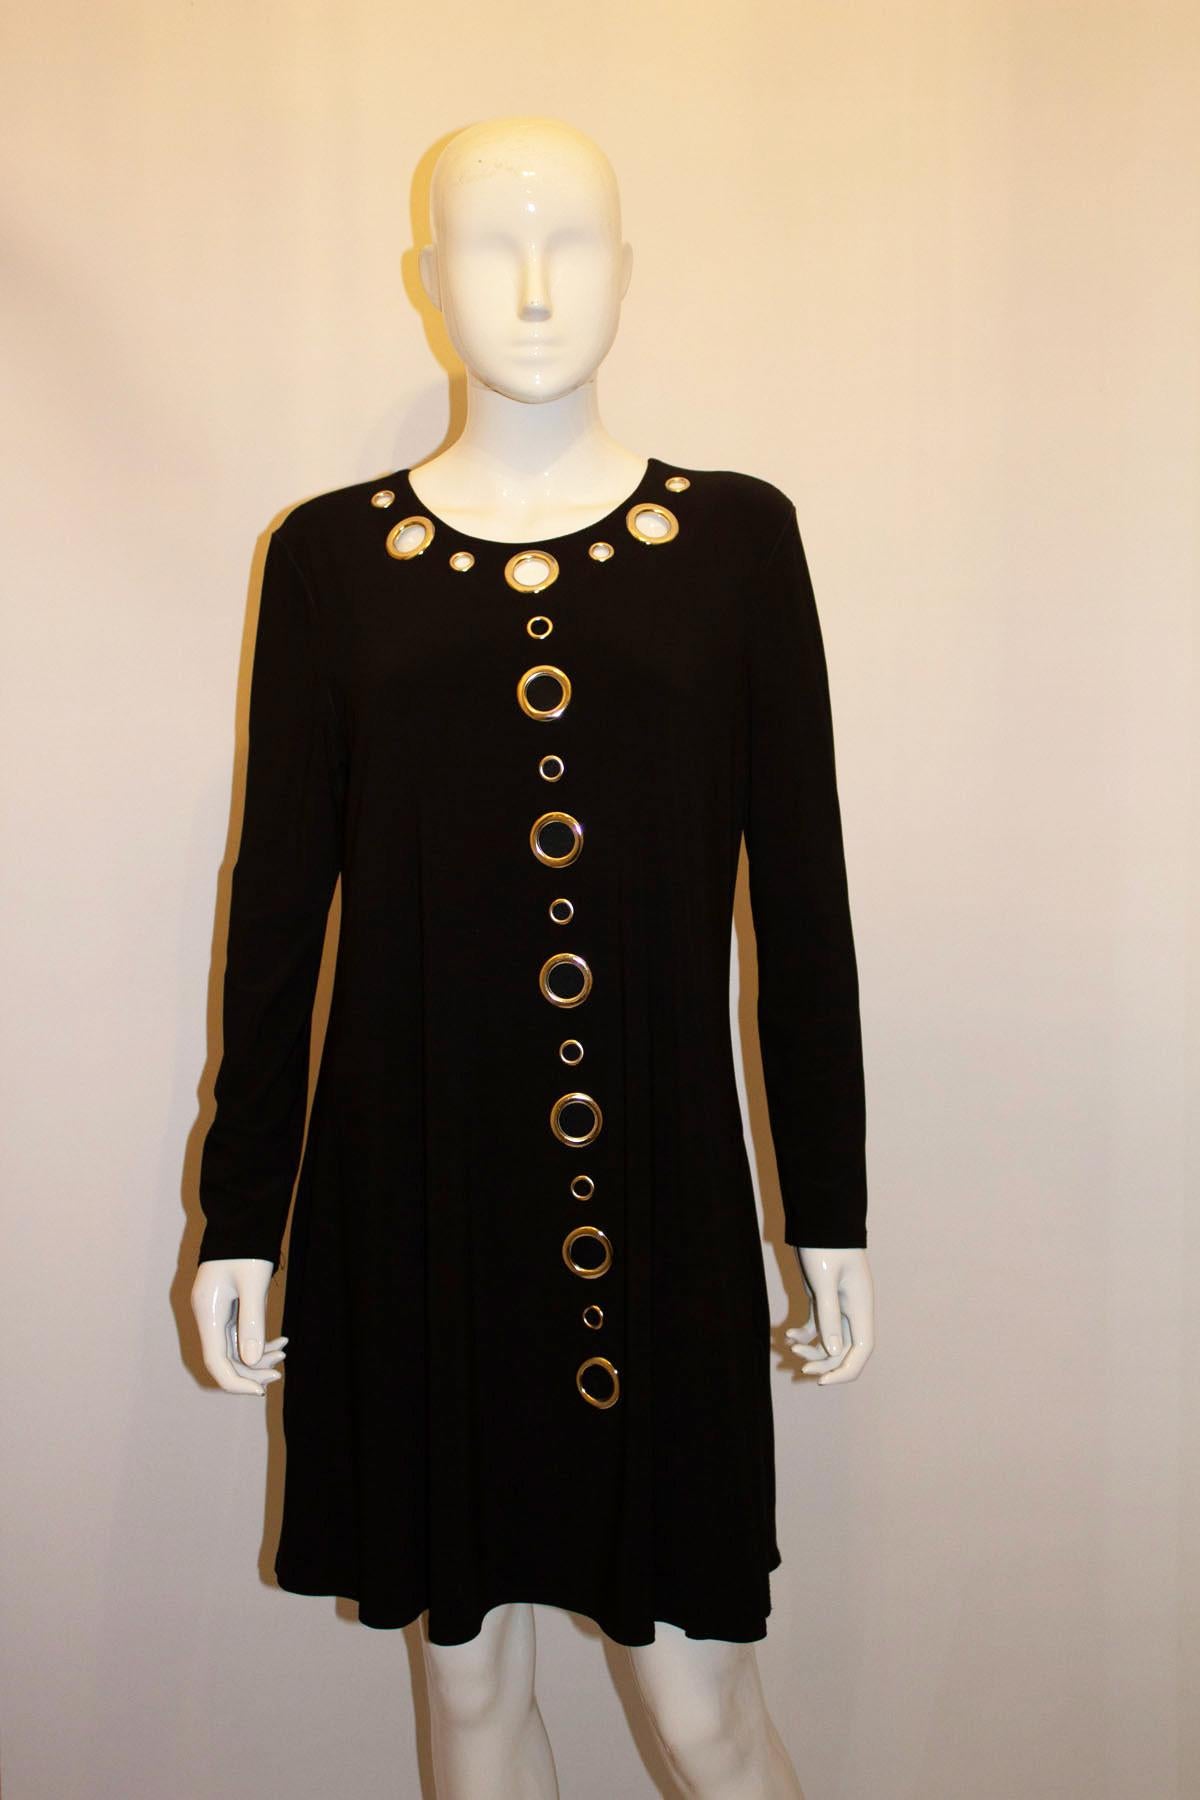 Vintage Black Jersey Dress with Decorative Holes In Good Condition For Sale In London, GB